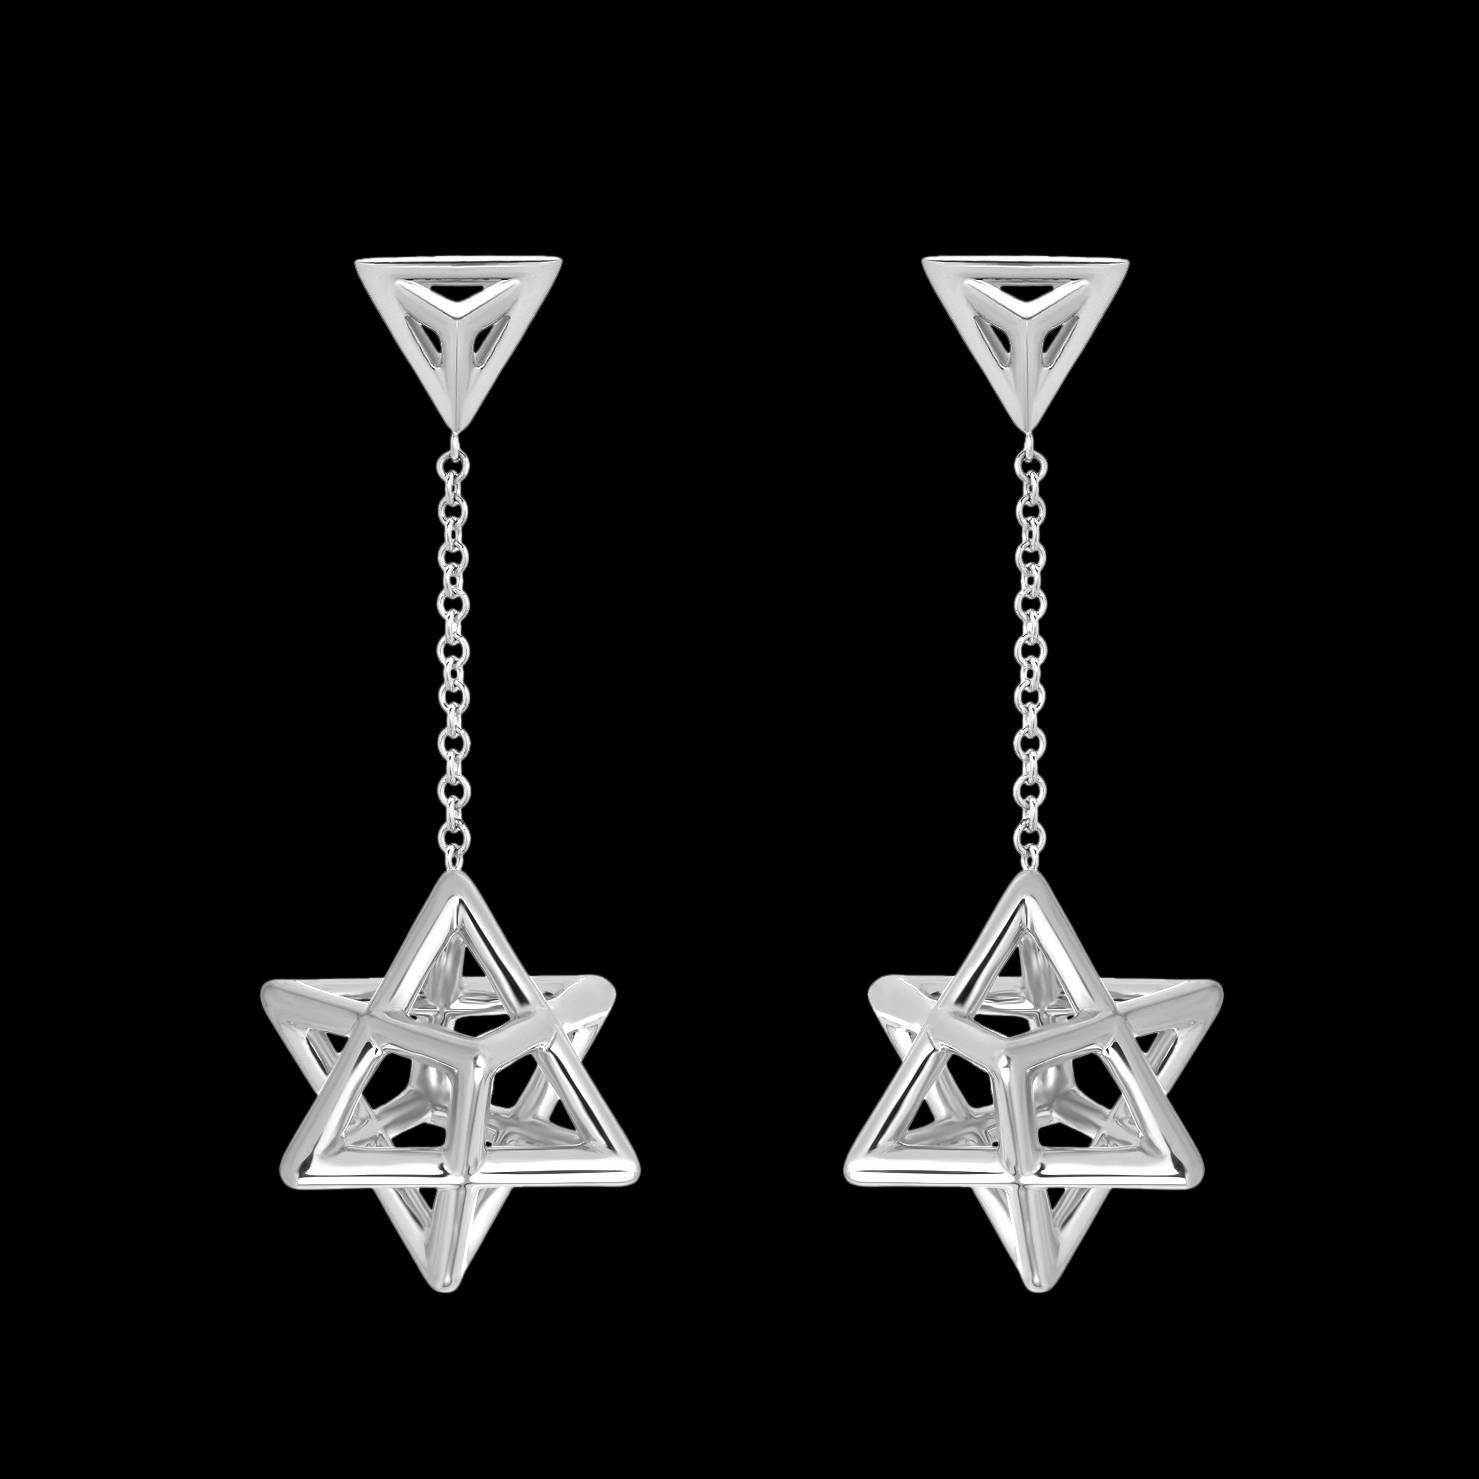 Merkaba platinum drop earrings, tethered by a triangle stud, feature a single chain suspending a three dimensional Merkaba star tetrahedron, measuring 0.57 inches. Secure La Pousette ear backs mirror the triangle motif. 
Total length - 1.5